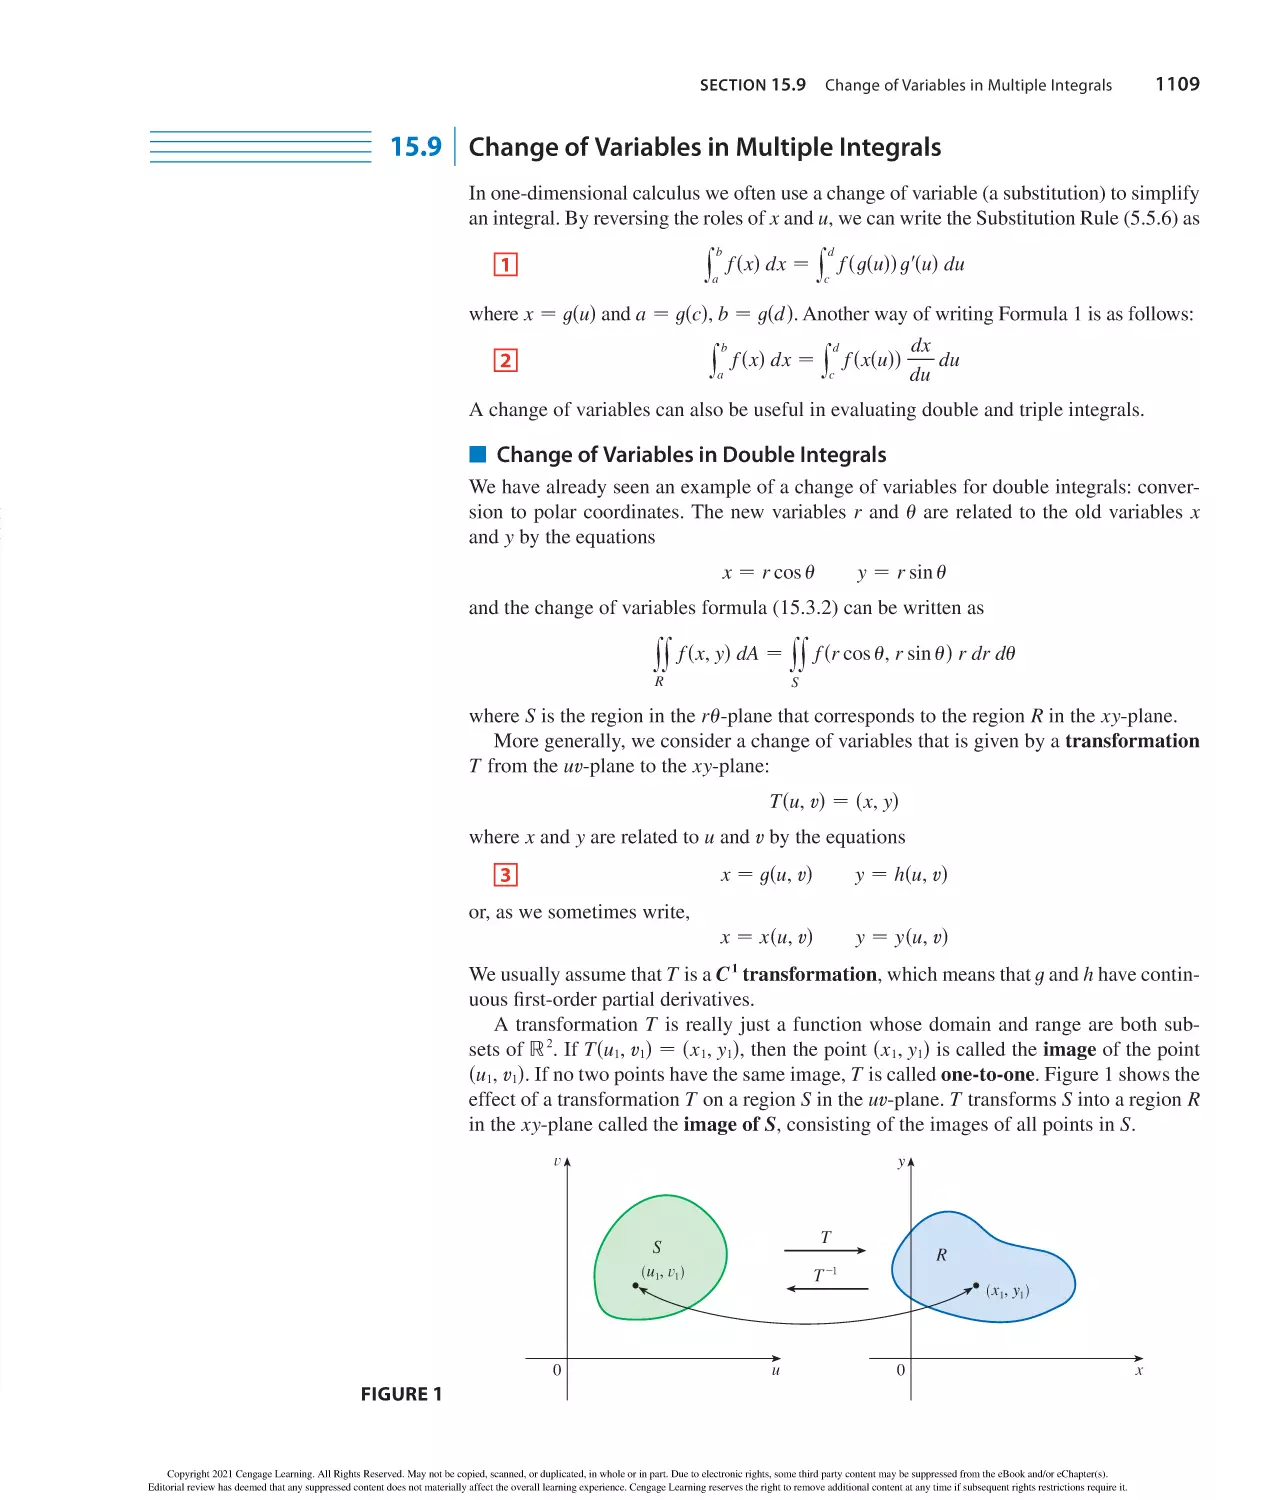 15.9 Change of Variables in Multiple Integrals